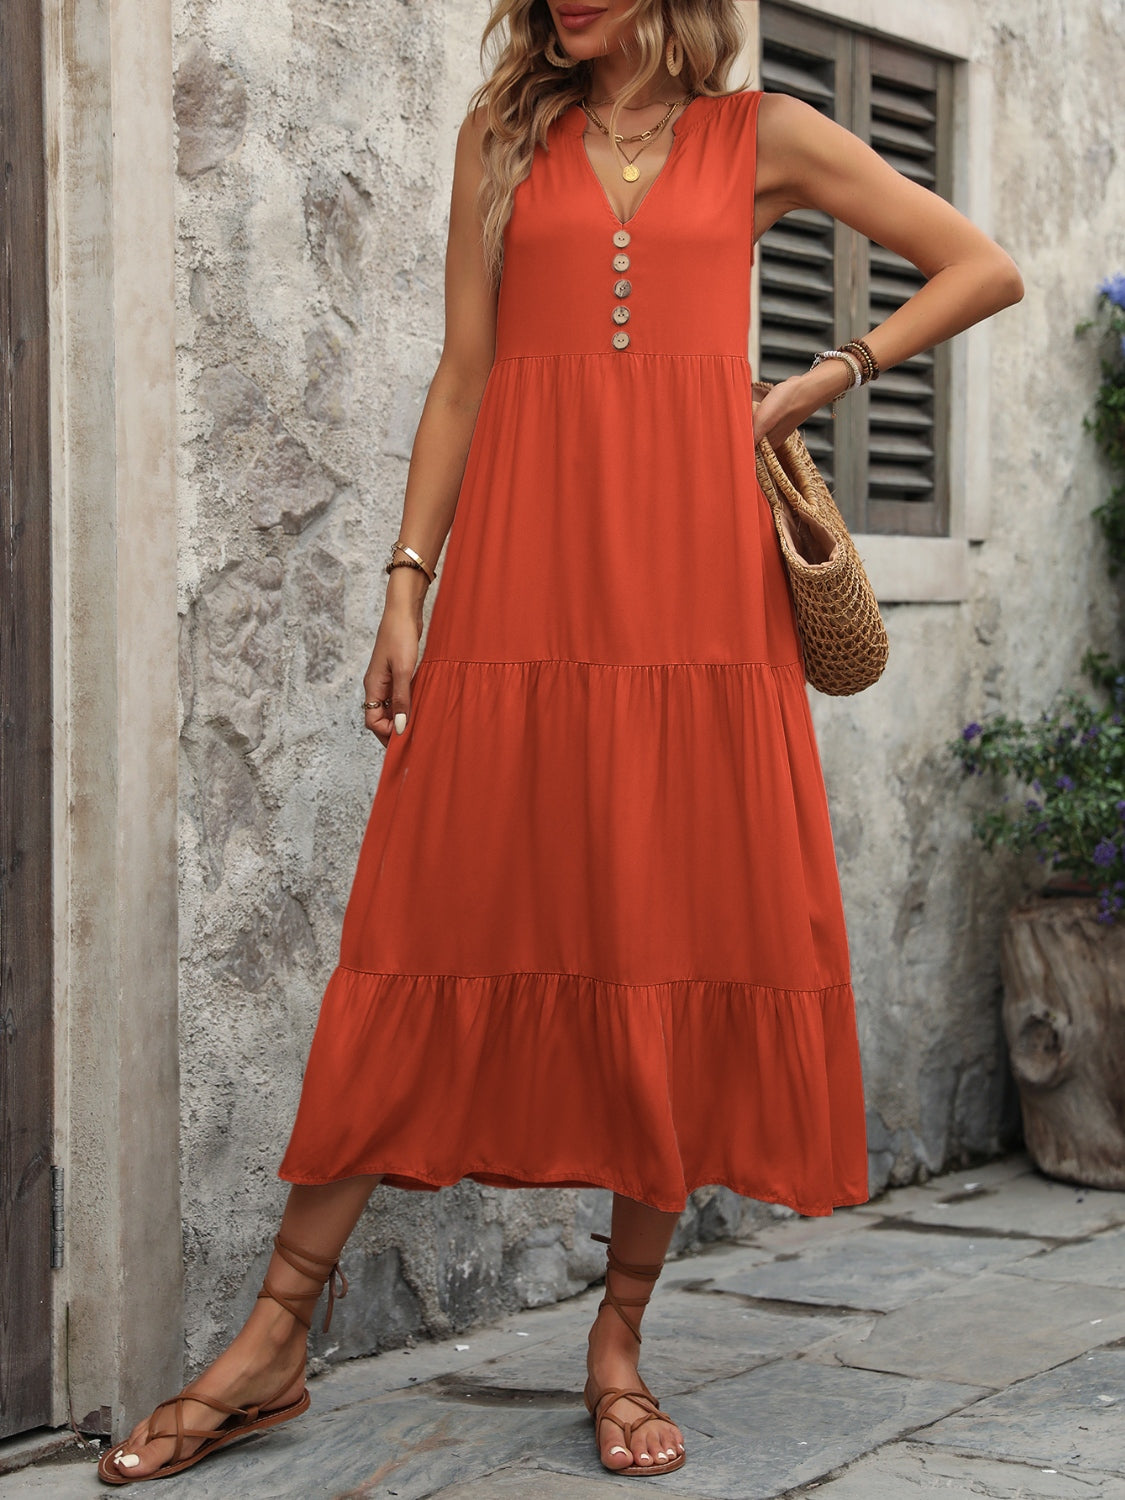 Cotton Sleeveless Dress with Decorative Buttons